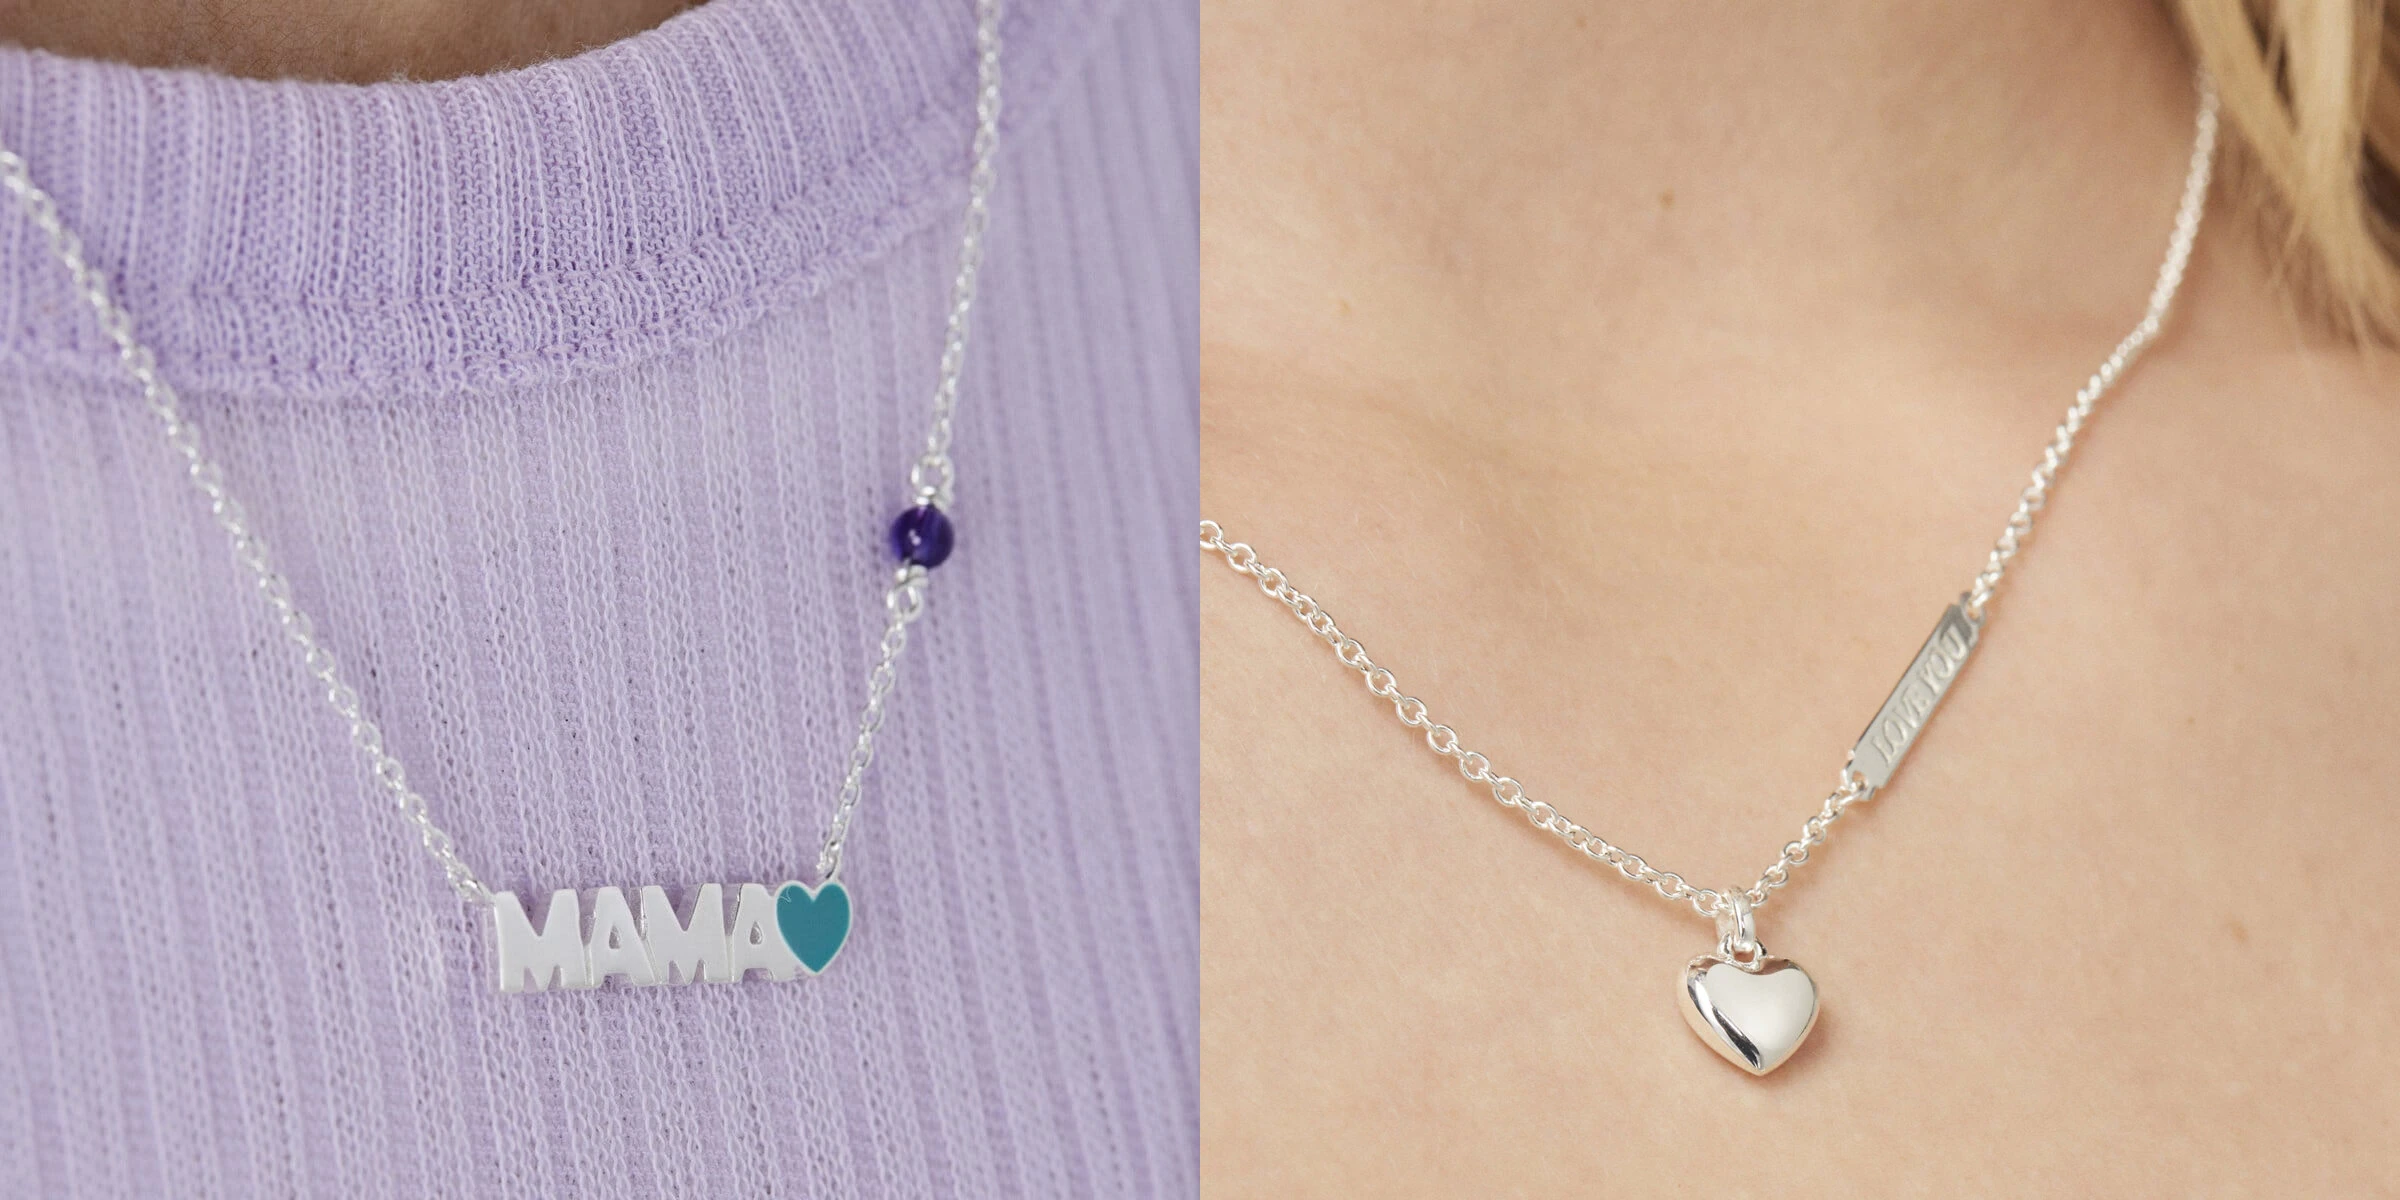 The most compatible Necklaces for mothers and daughters